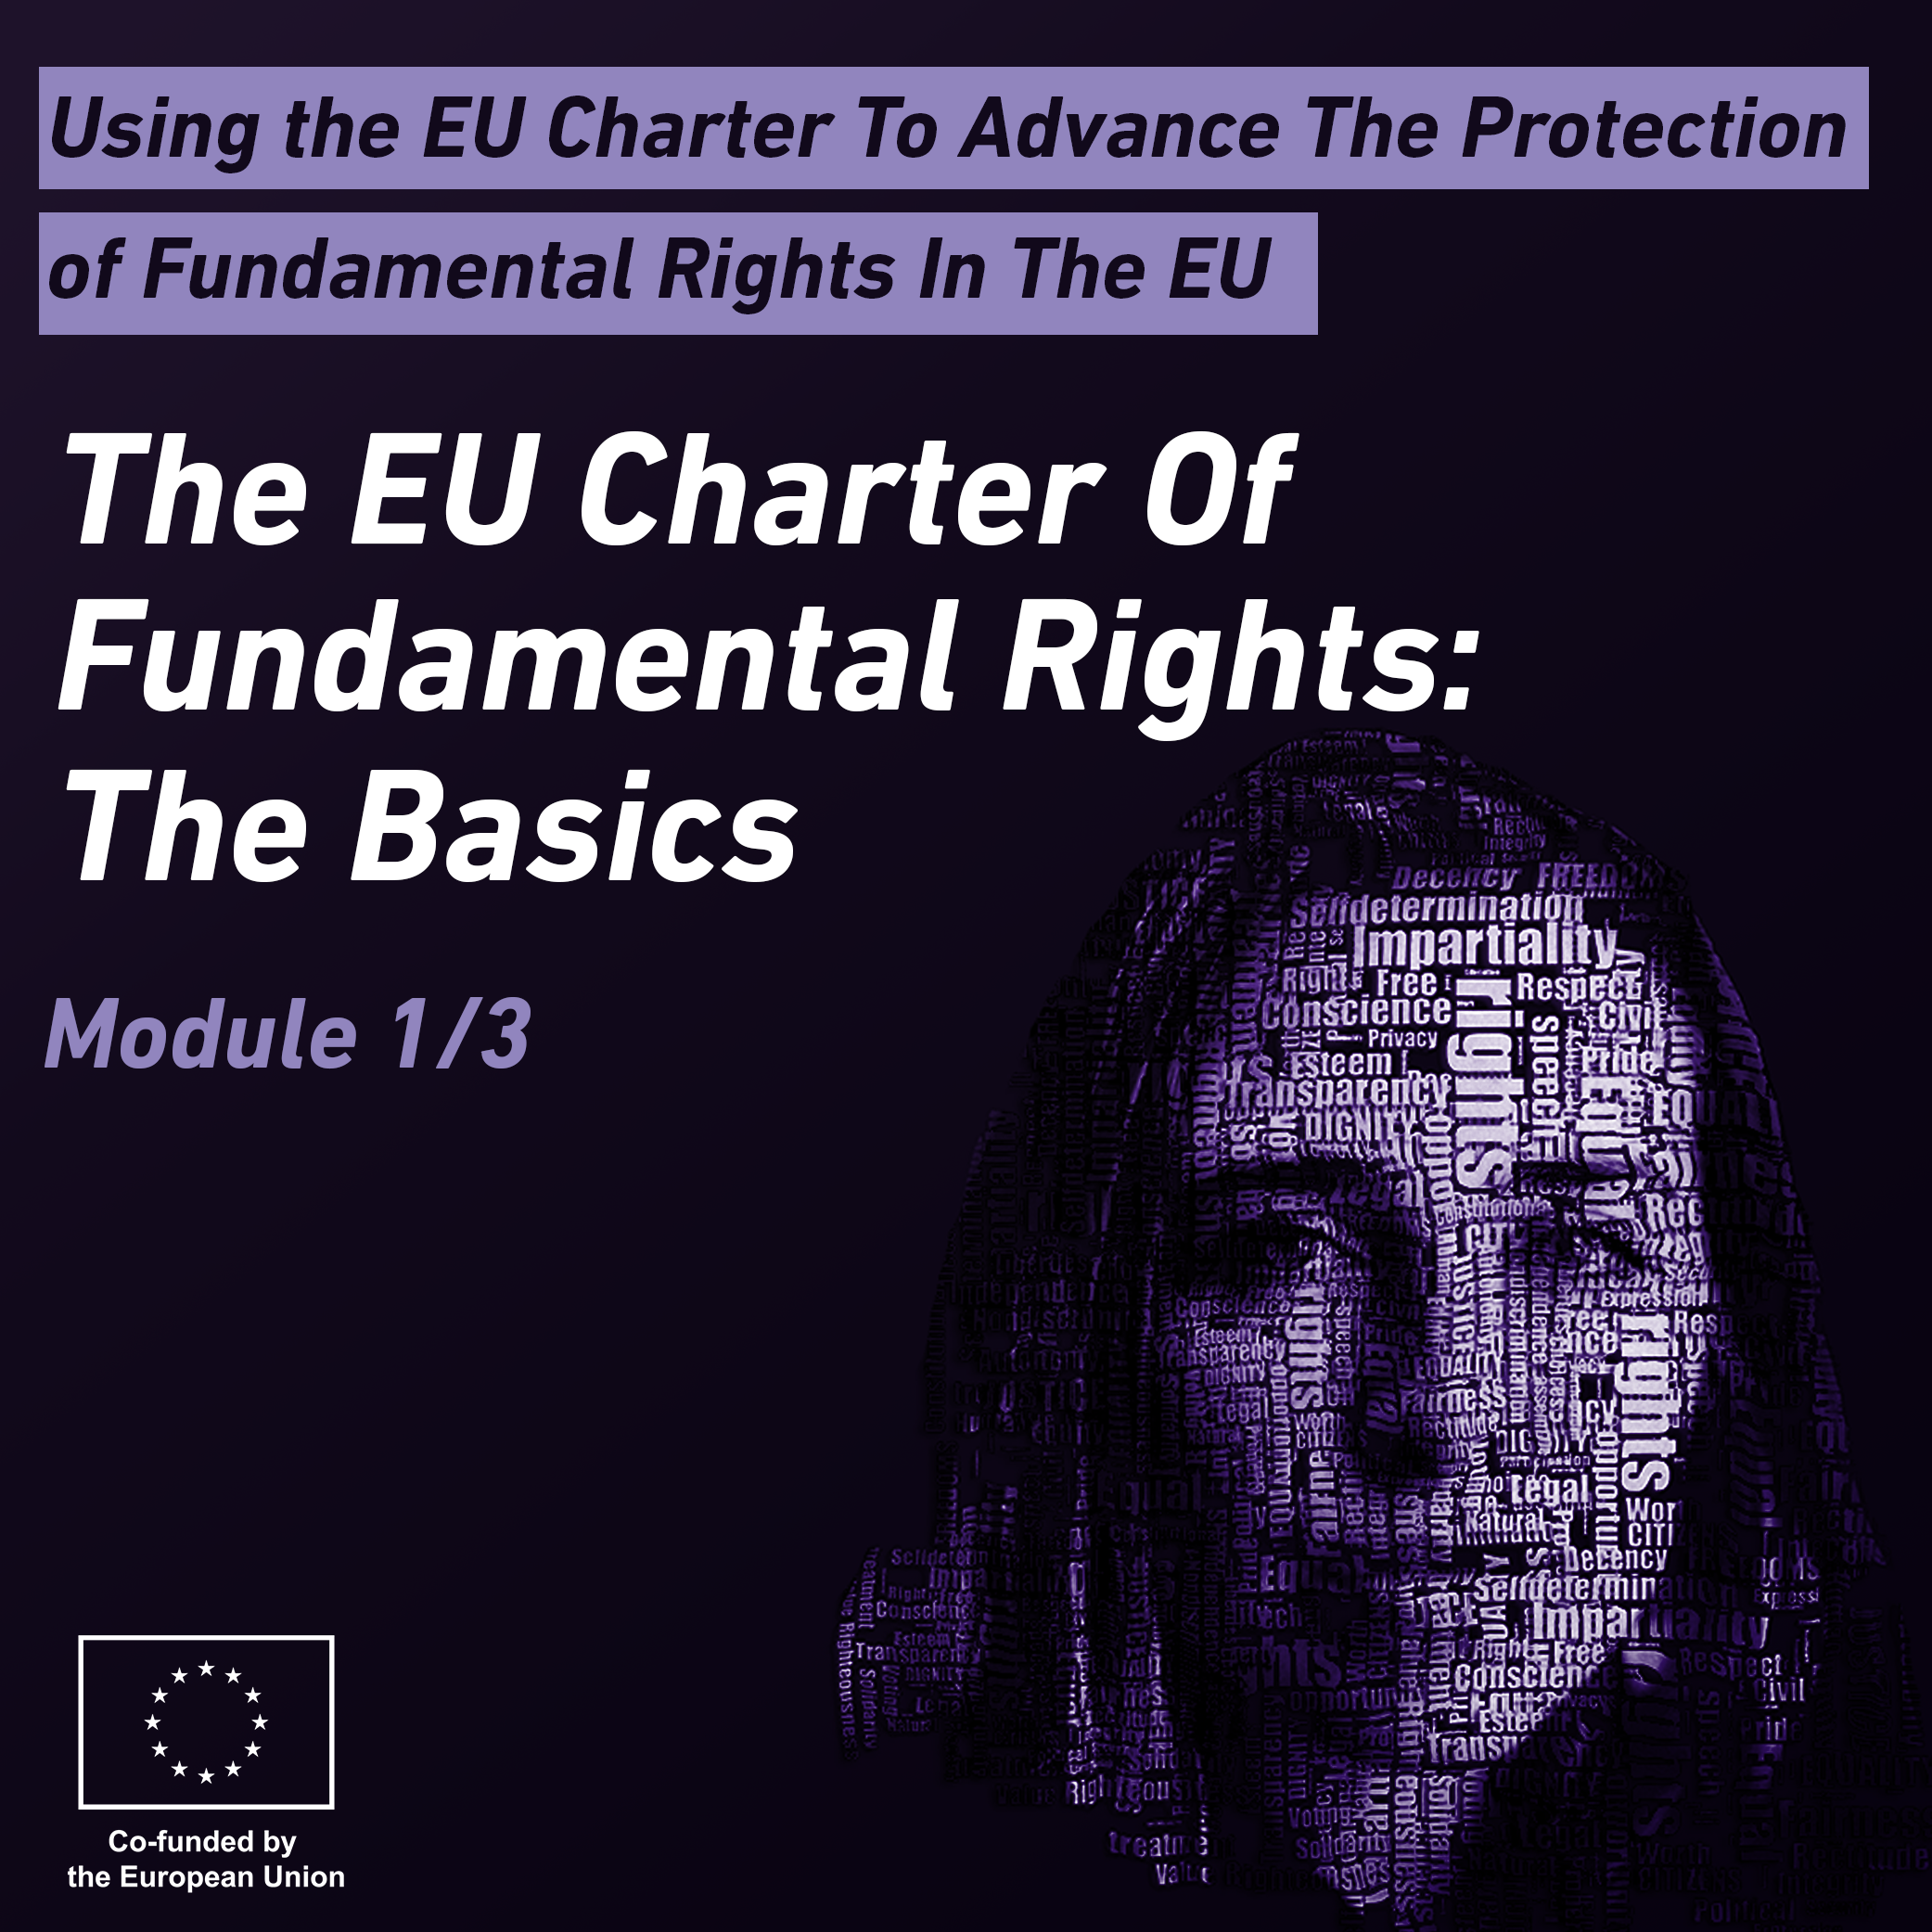 Using the EU Charter to Advance the Protection of Fundamental Rights in the EU - Module 1 LIB009